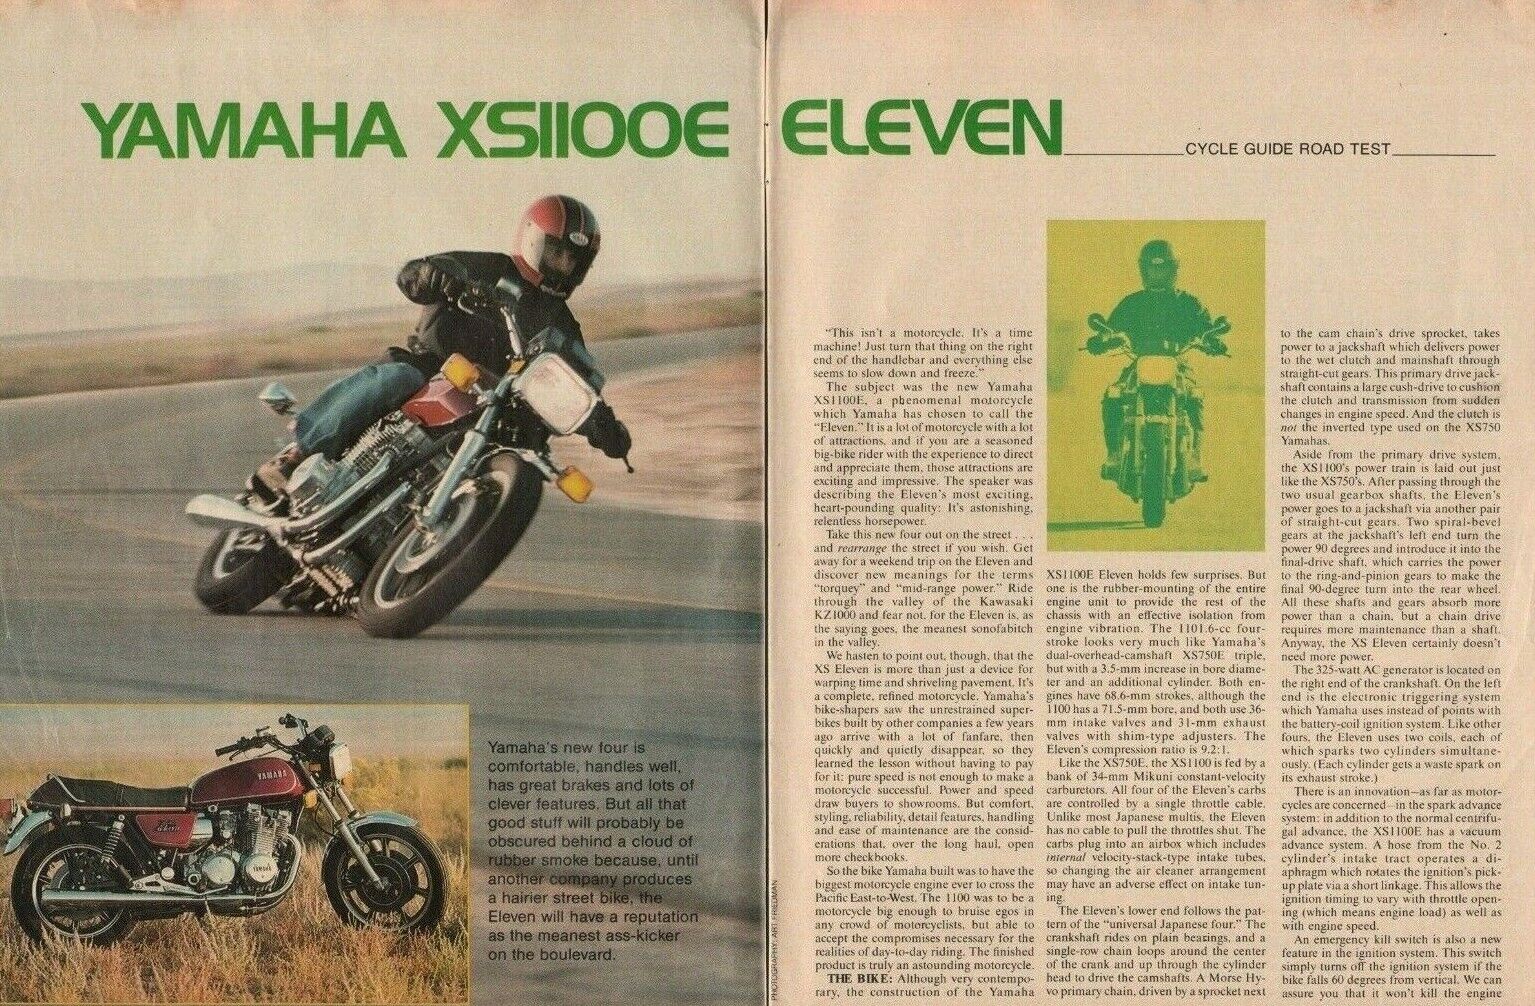 1978 Yamaha XS1100E Eleven - 8-Page Vintage Motorcycle Road Test Article